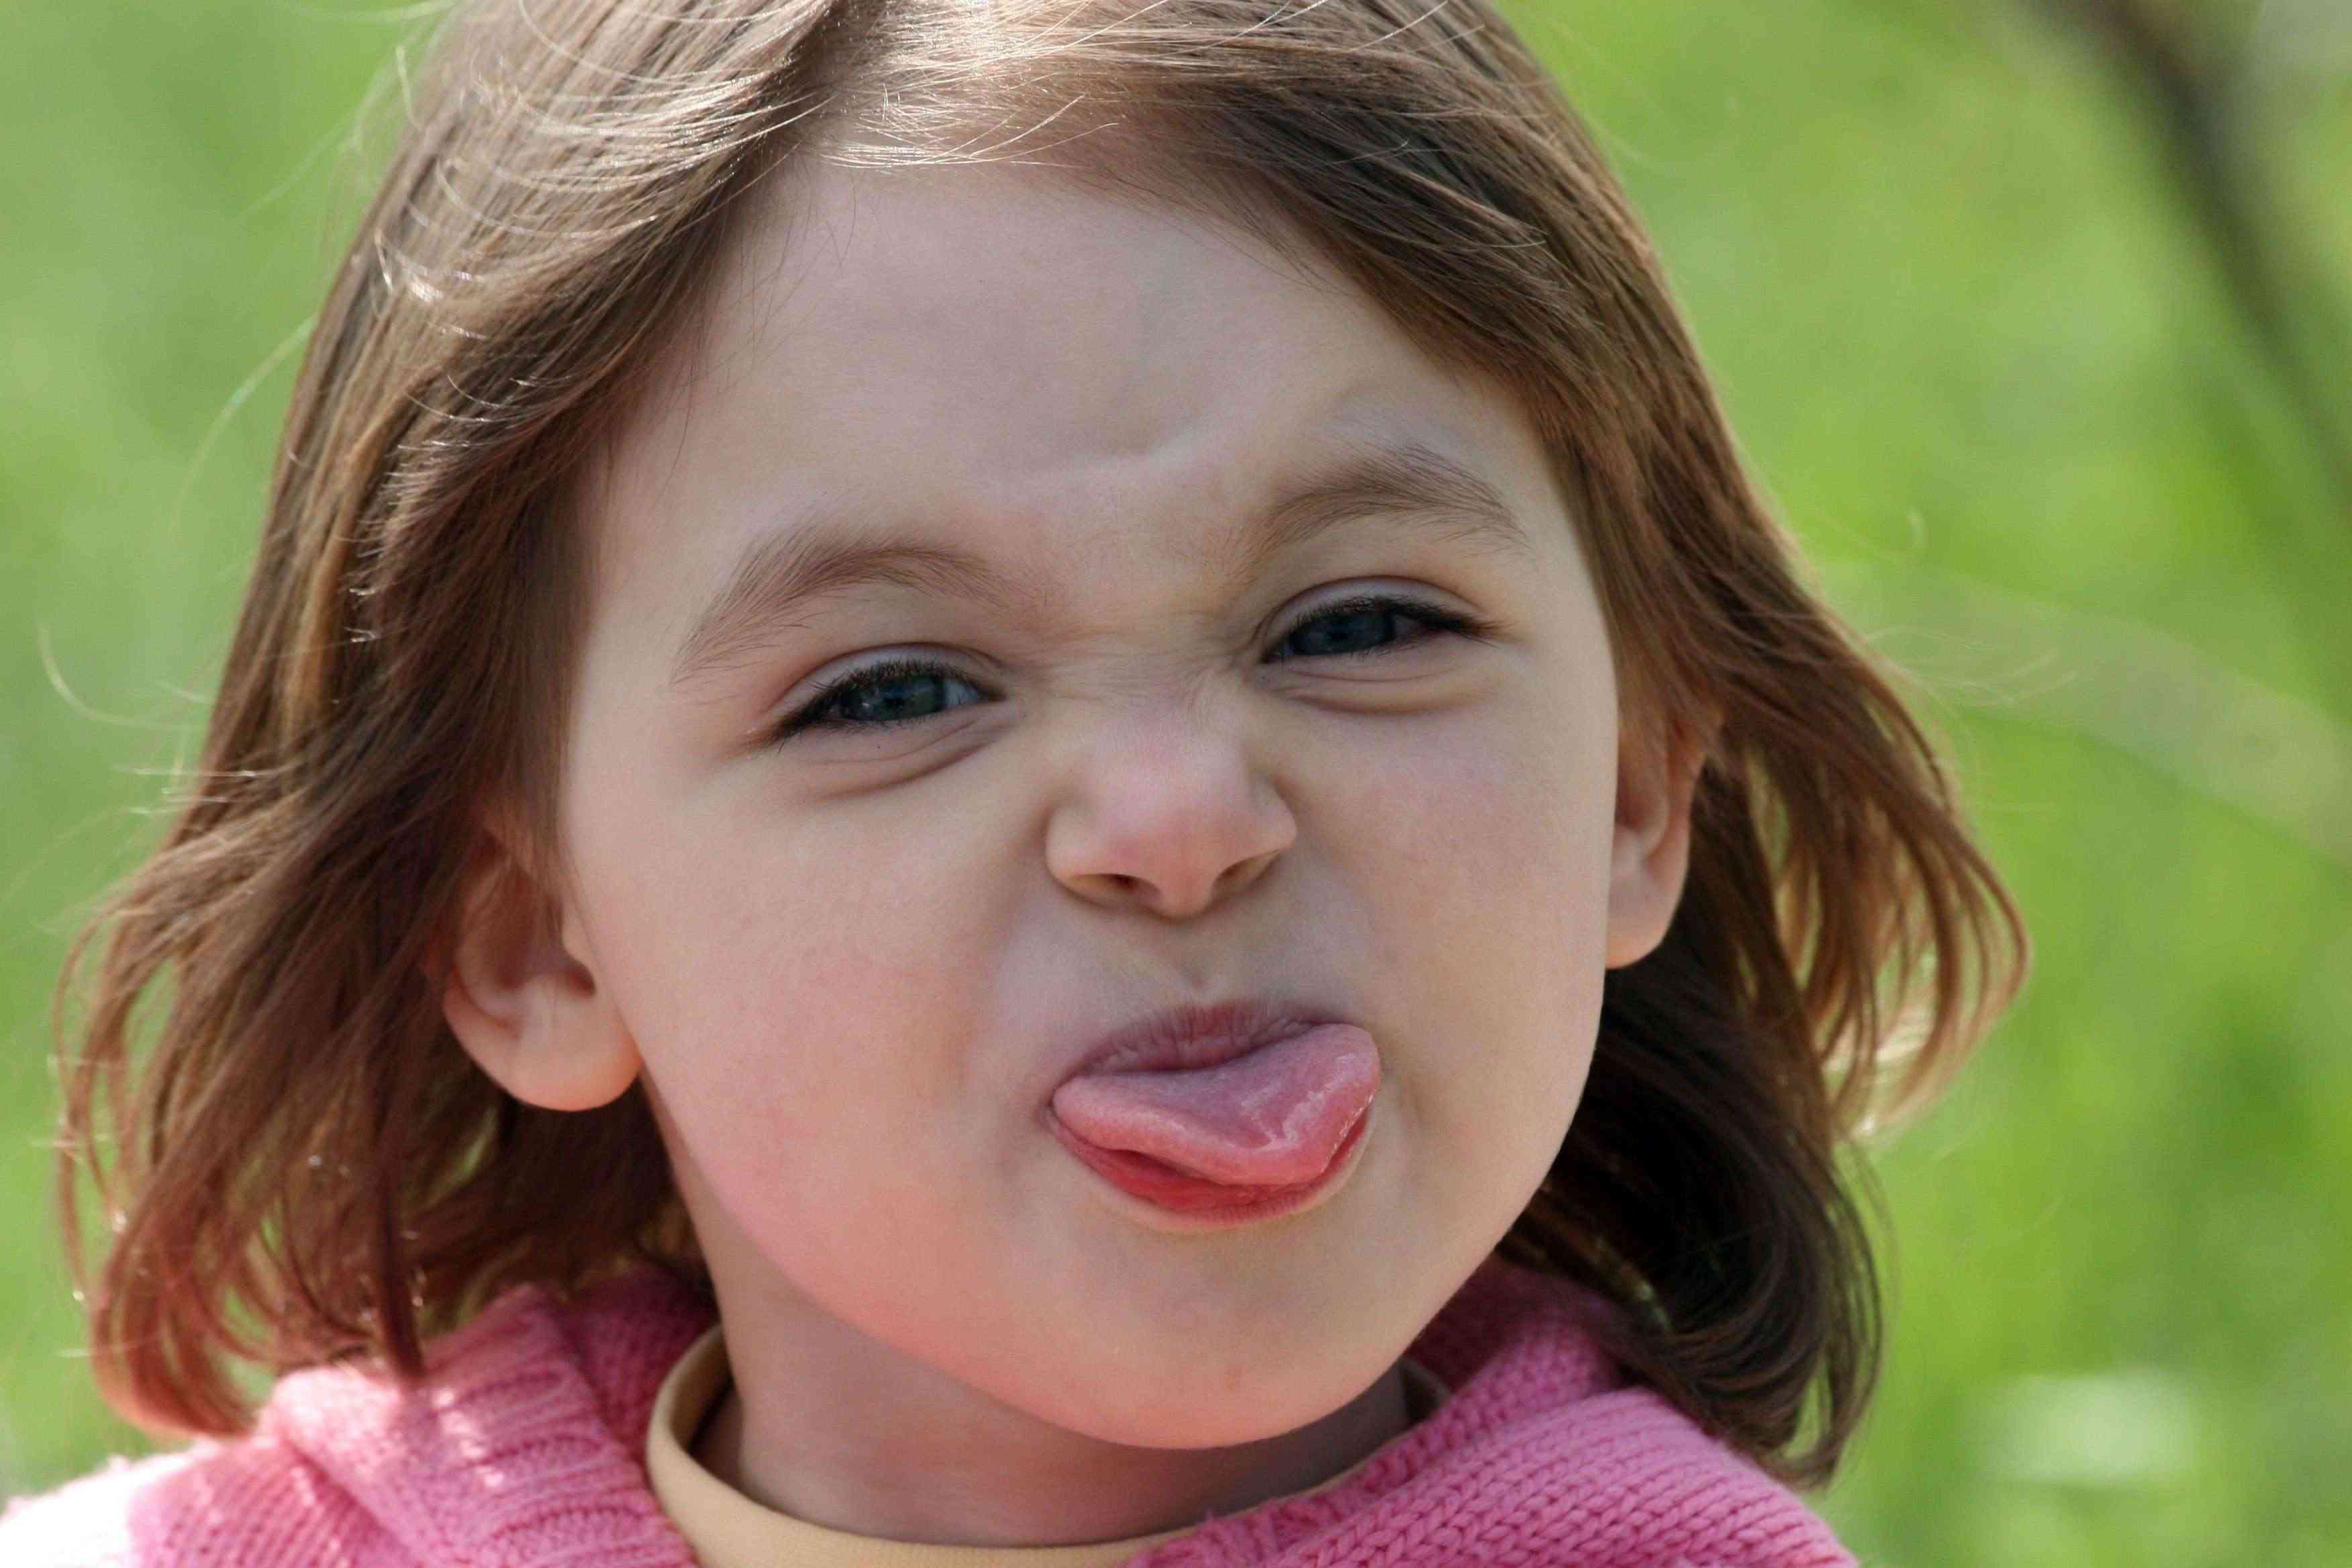 Baby Girl Showing Tongue Funny Picture